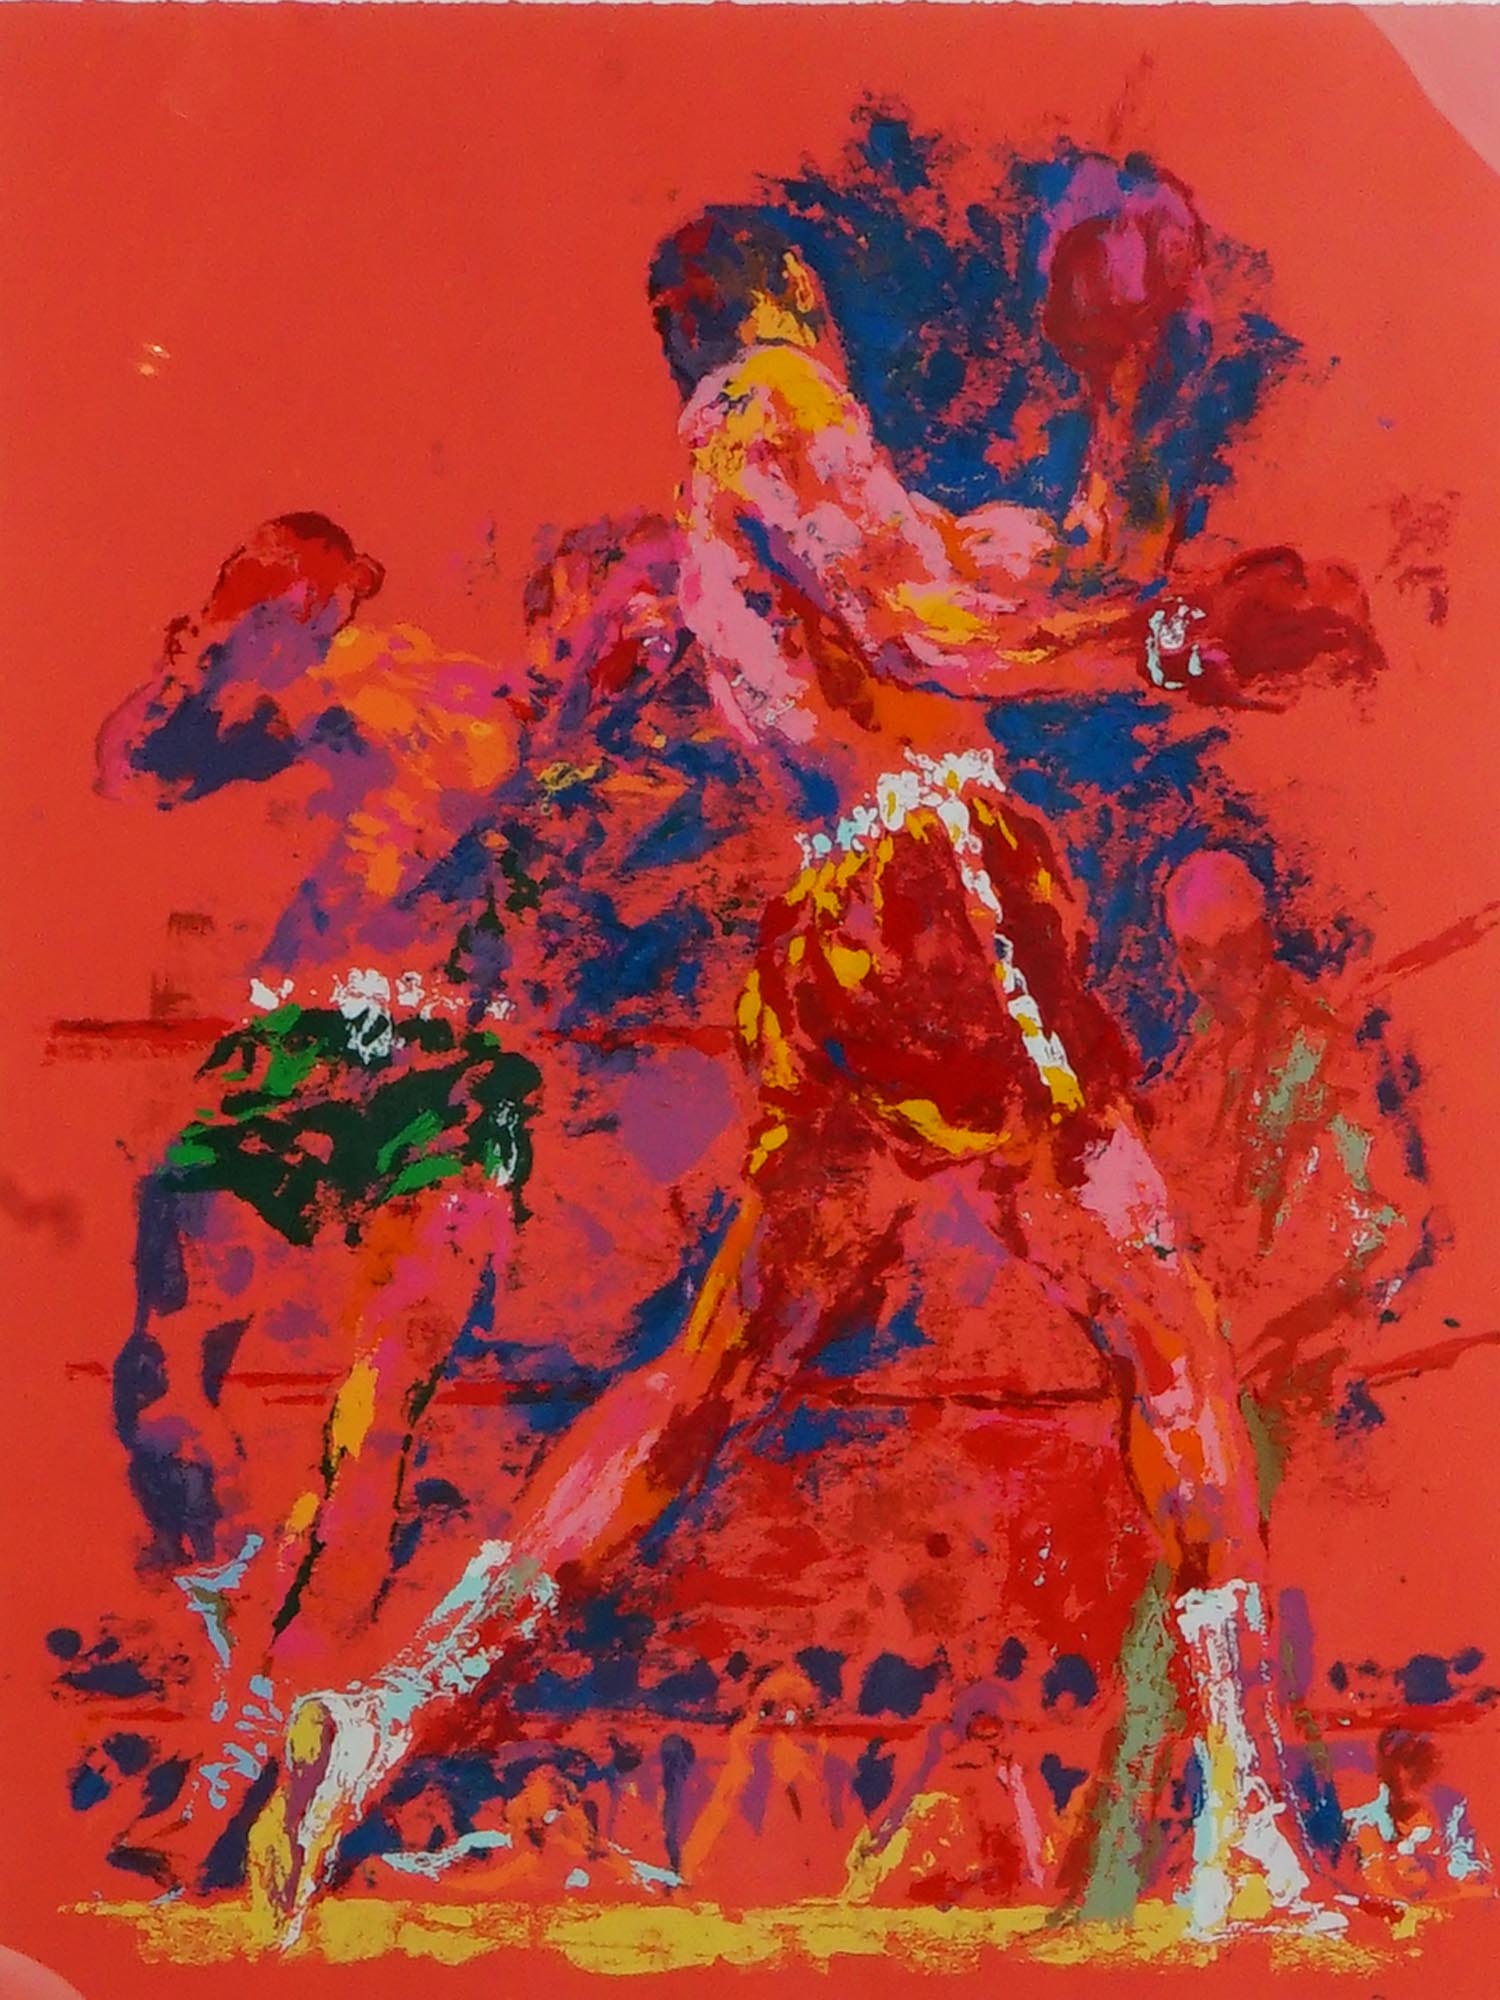 LIMITED ED ART SERIGRAPH PRINT BY LEROY NEIMAN PIC-1